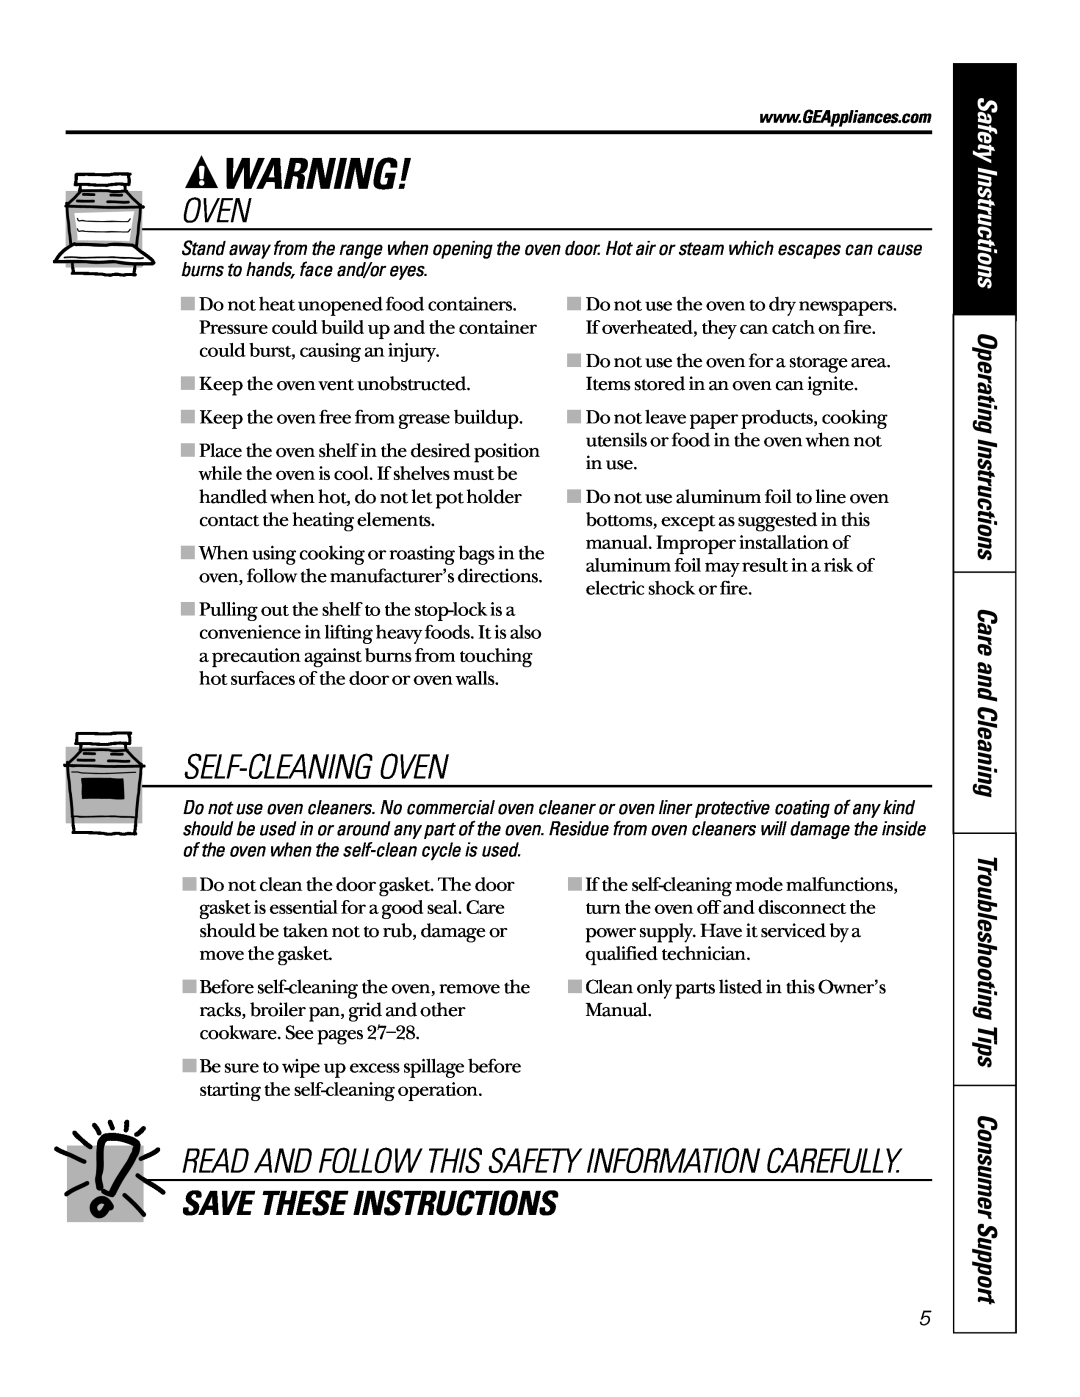 GE JG966 Self-Cleaning Oven, Save These Instructions, Troubleshooting Tips, Consumer Support, Safety Instructions 